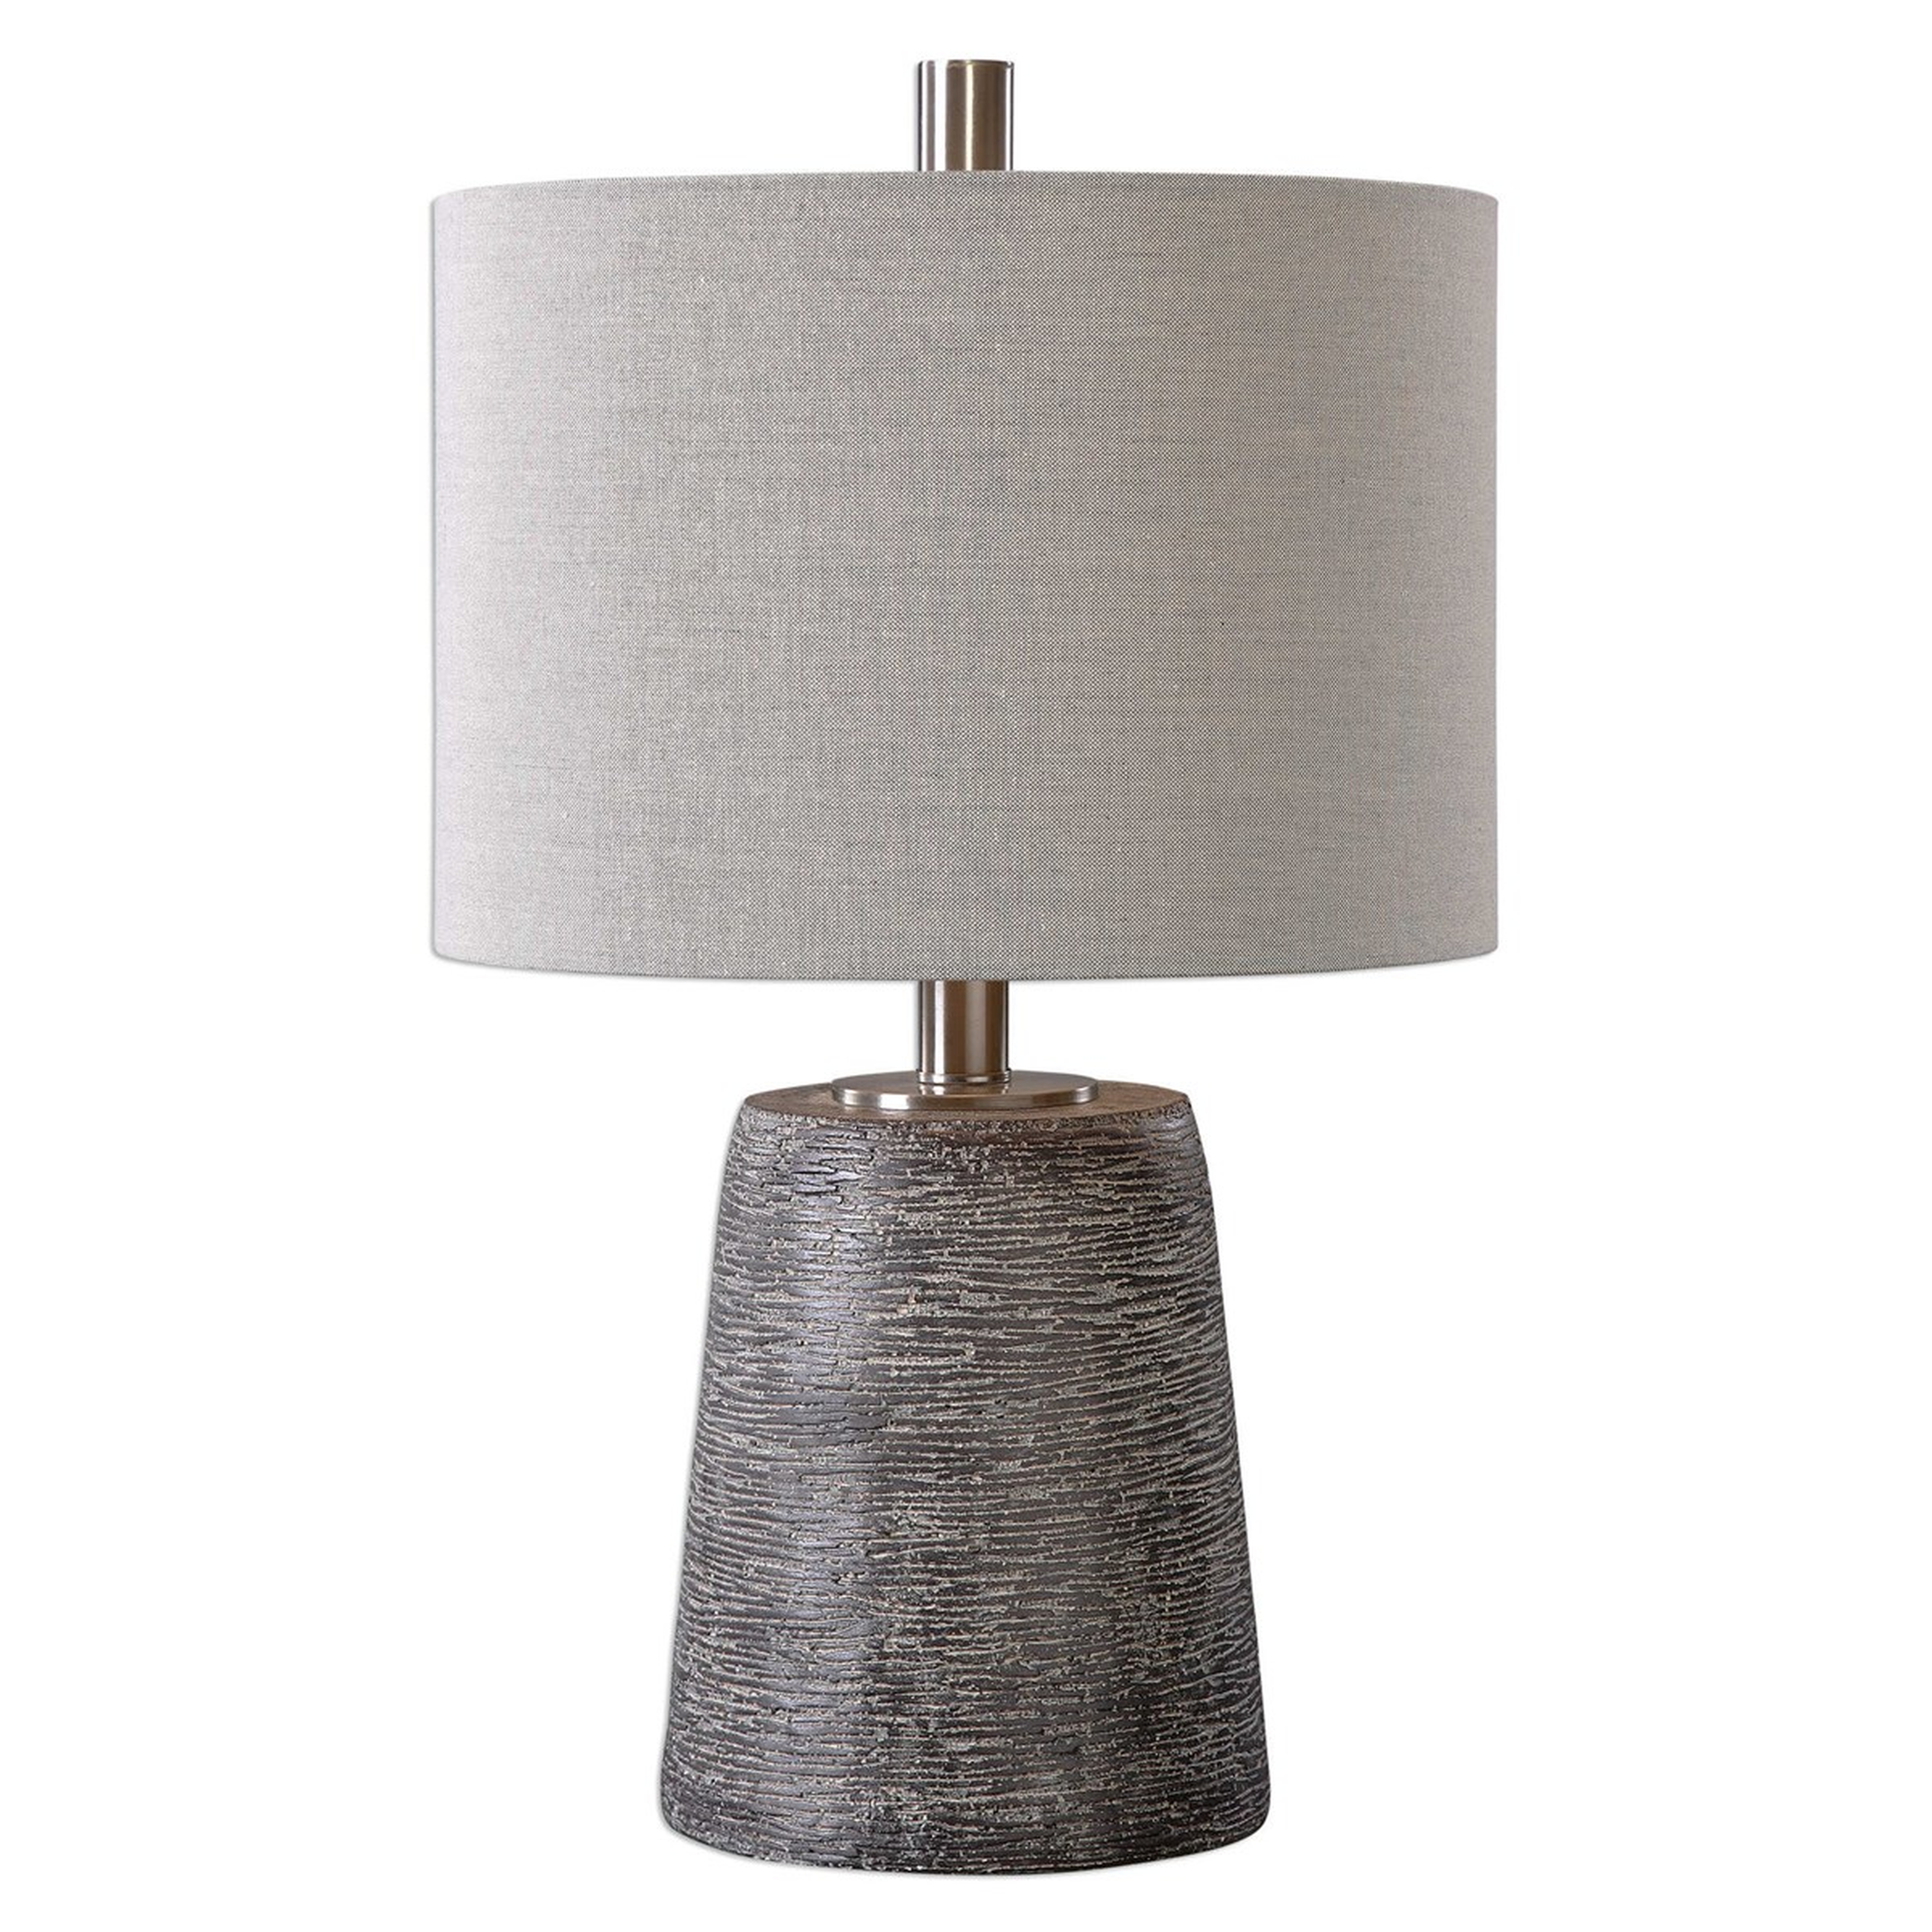 Duron Table Lamp - Hudsonhill Foundry